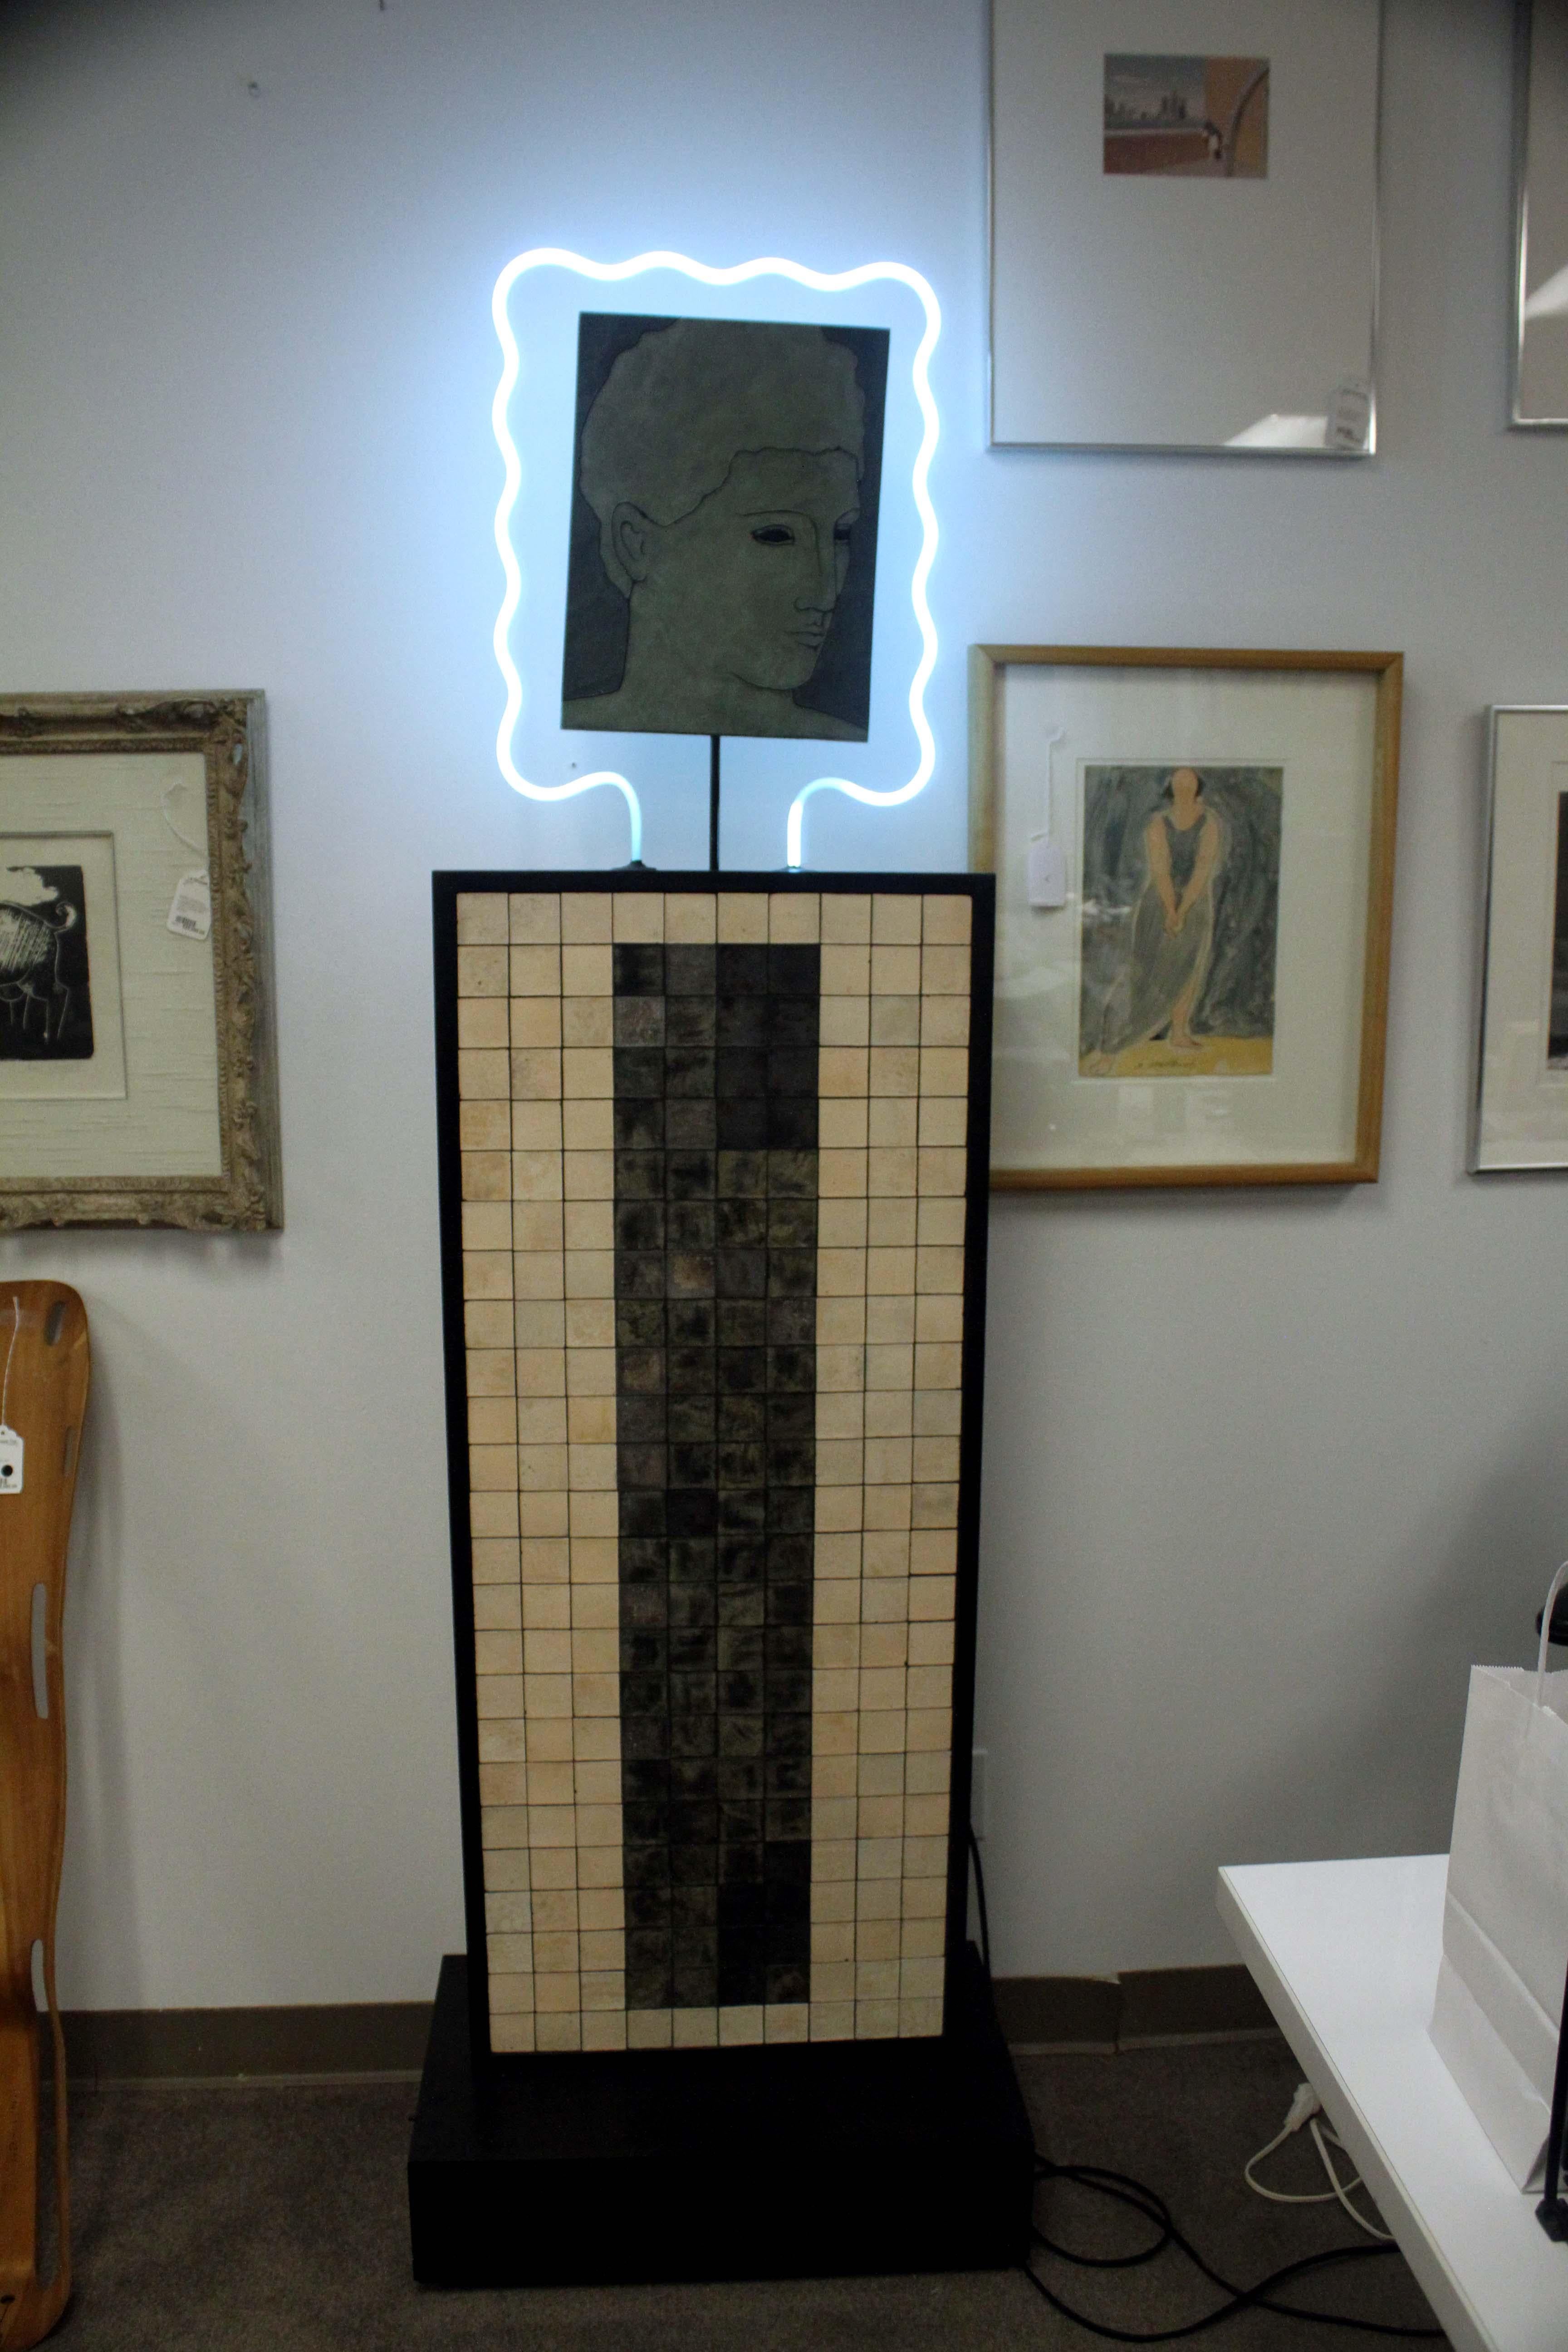 An artful post modern sculpture depicting a Roman-Greco portrait on a ceramic tiled pedestal base. Signed Snyderman 1988. Attributed to American artist and gallerist Evan Snyderman. A curvy neon light outlines the portrait making a unique statement.